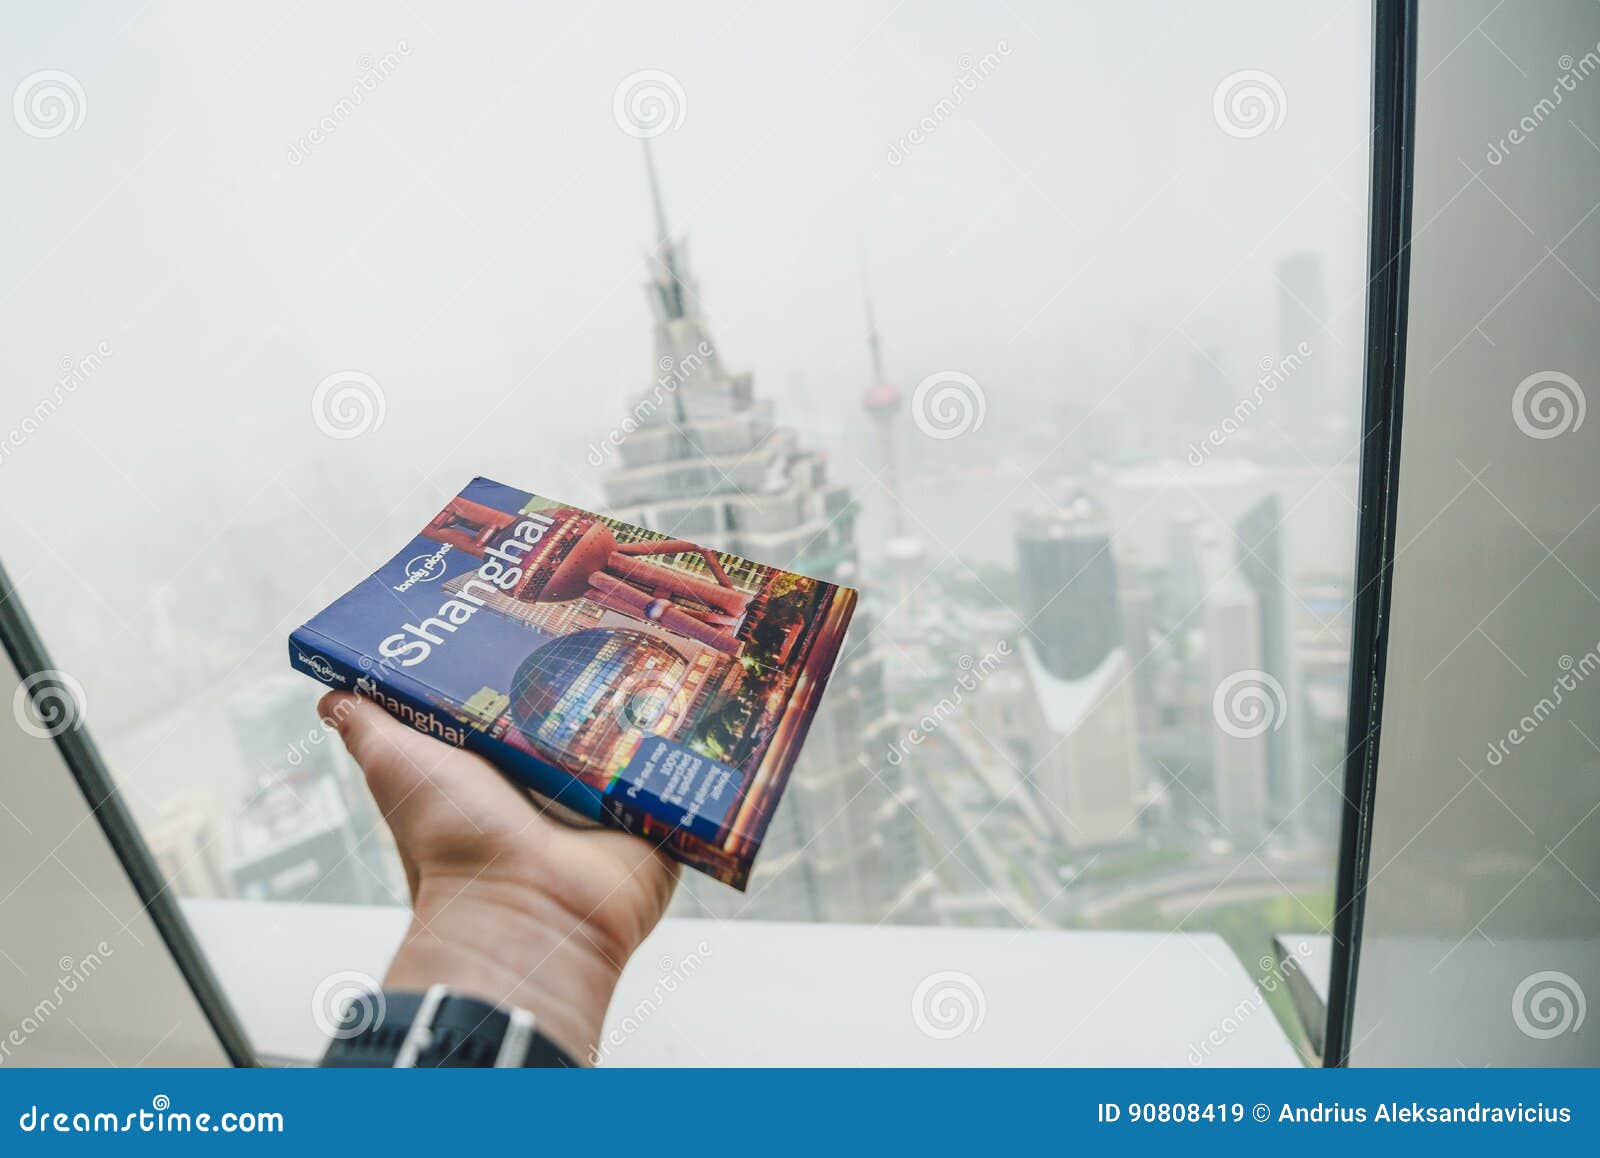 Lonely Planet Travel Book In Hand Shanghai China Editorial Stock Image Image Of Centre